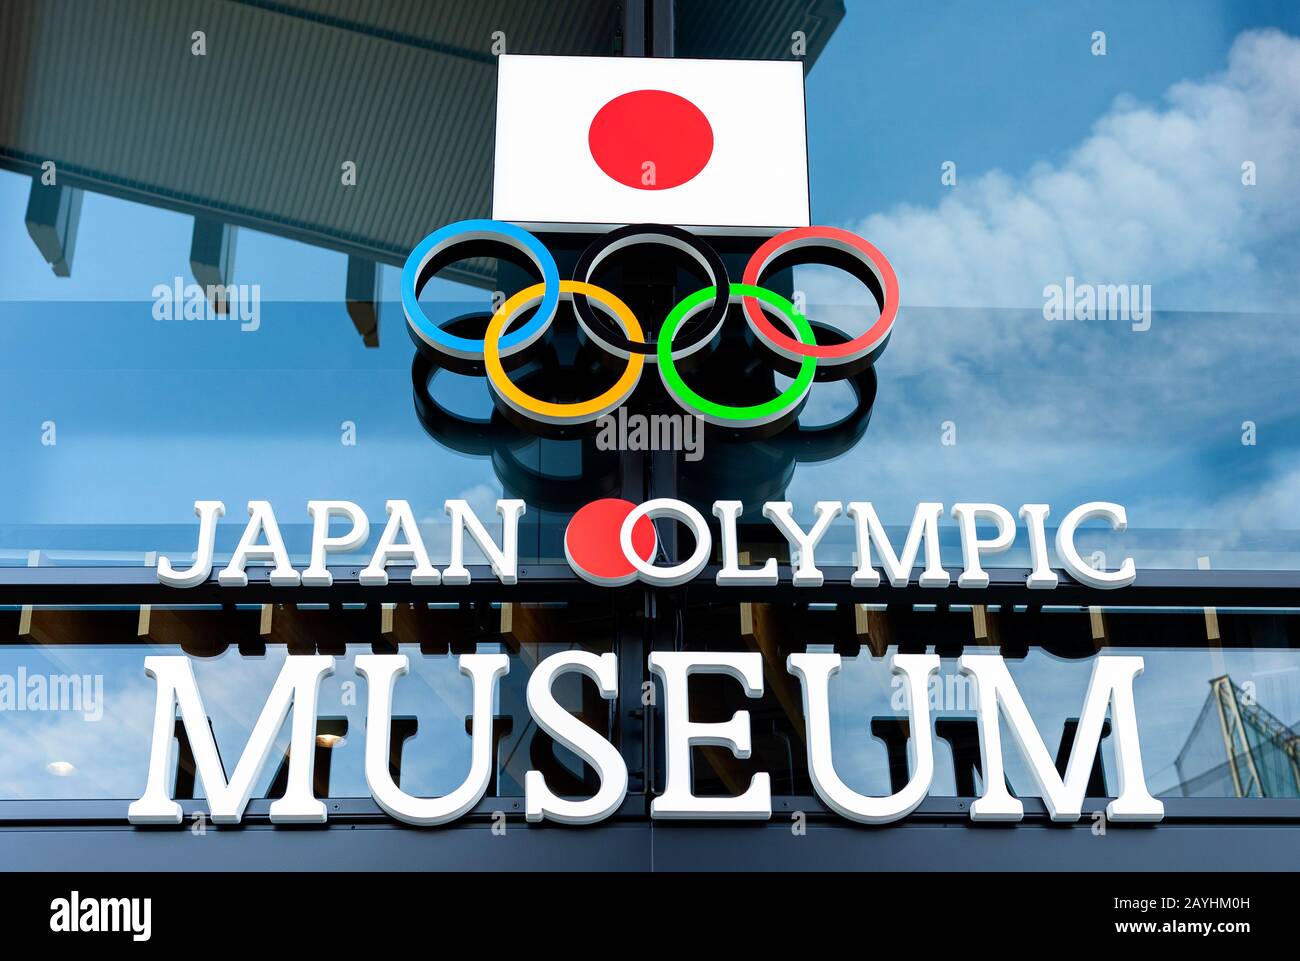 Anelli Olimpici E Bandiera Giapponese All'Ingresso Del Museo Olimpico Giapponese Japan Sport Olympic Square Tokyo Foto Stock